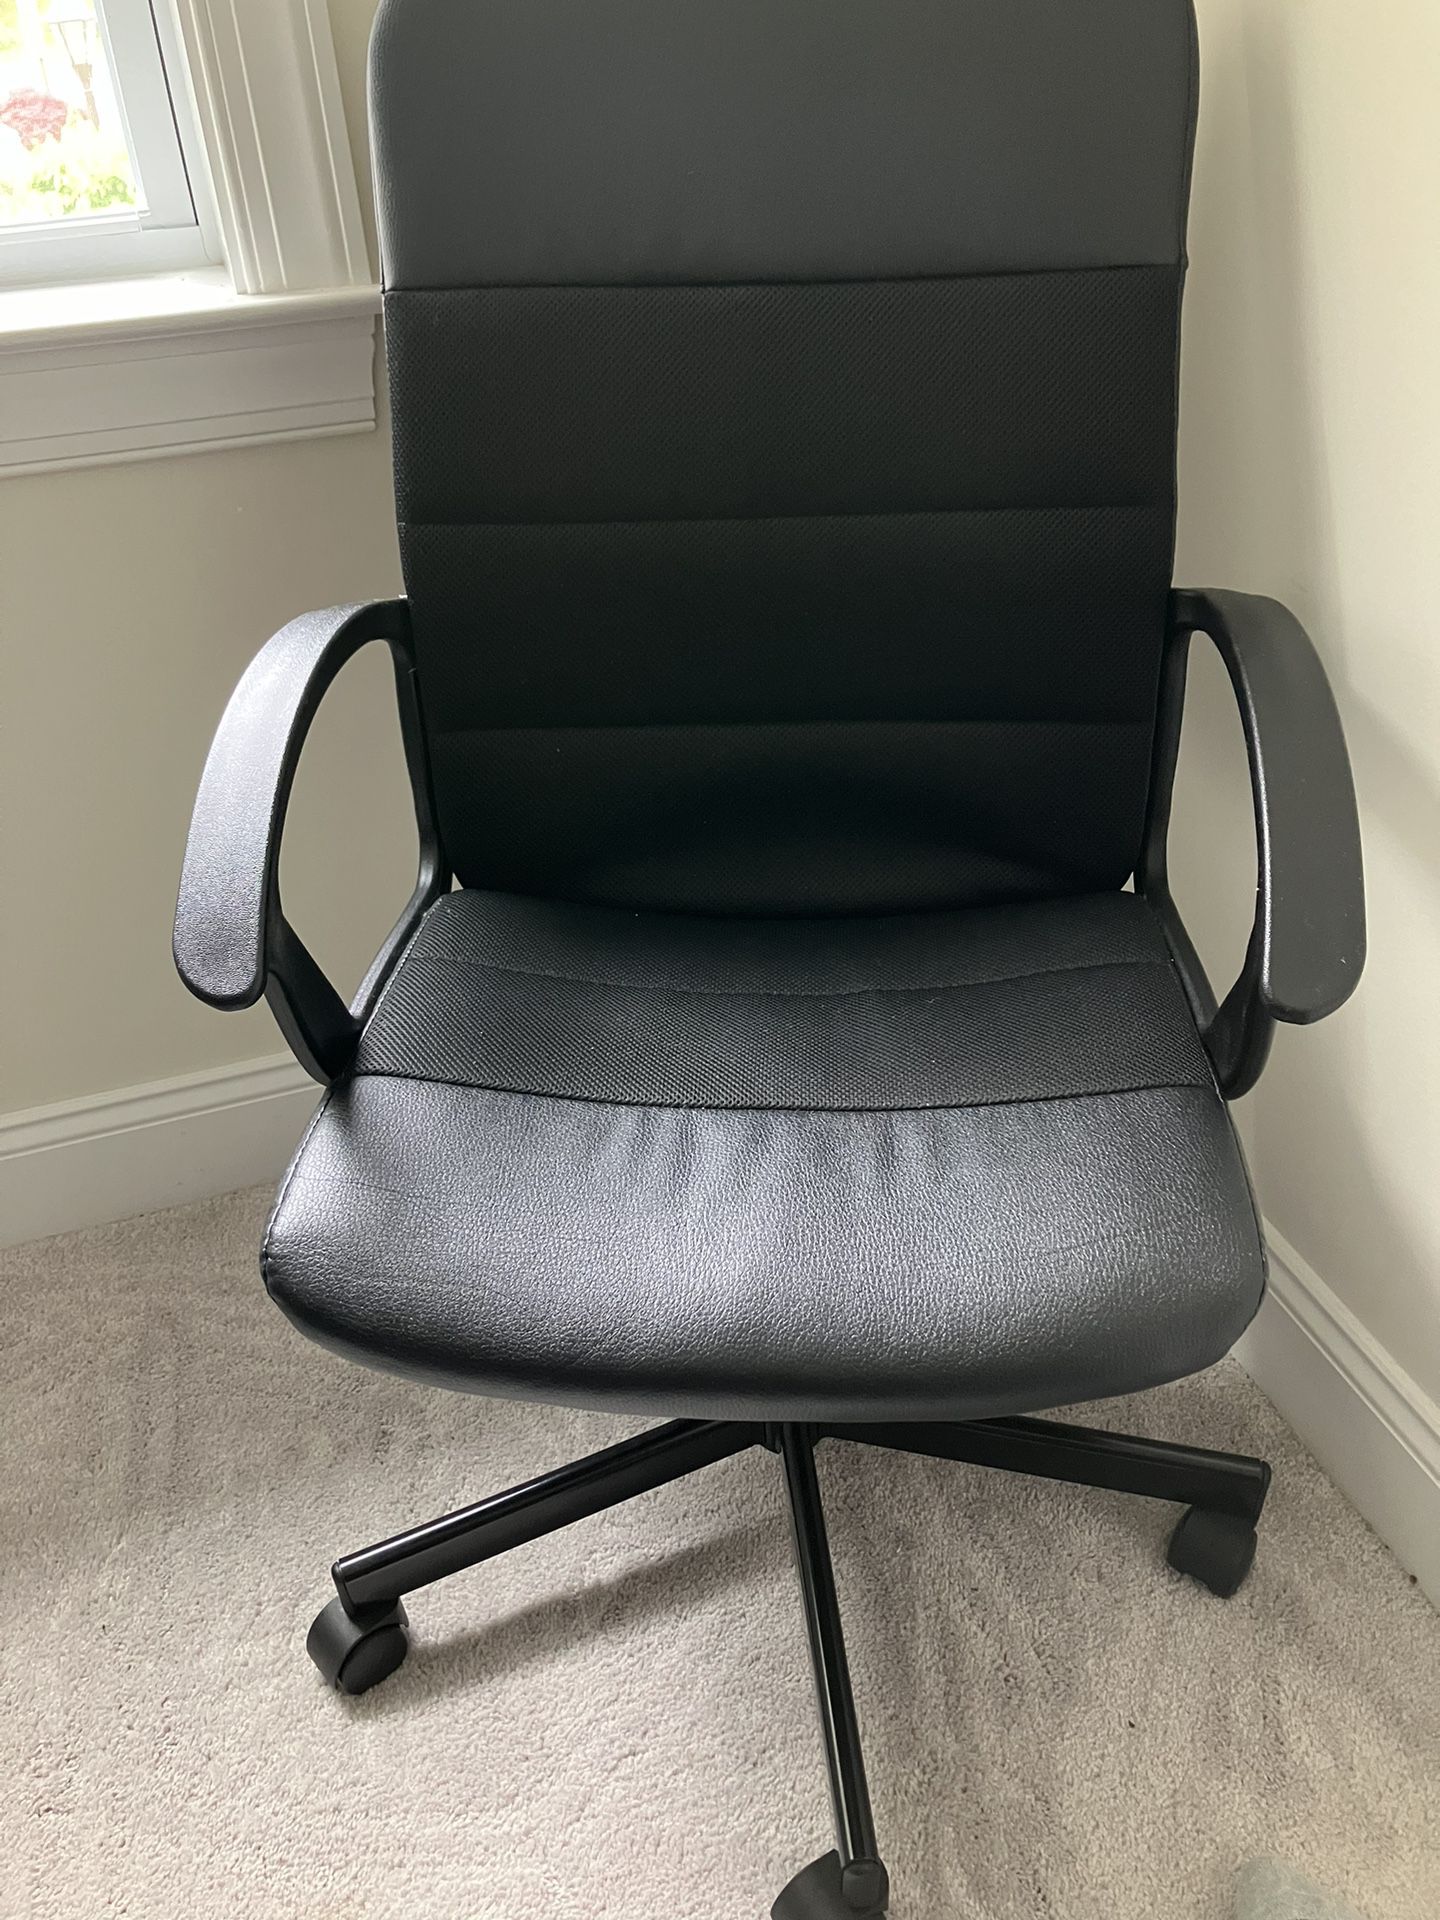 Swivel chair with Adjustable Height 